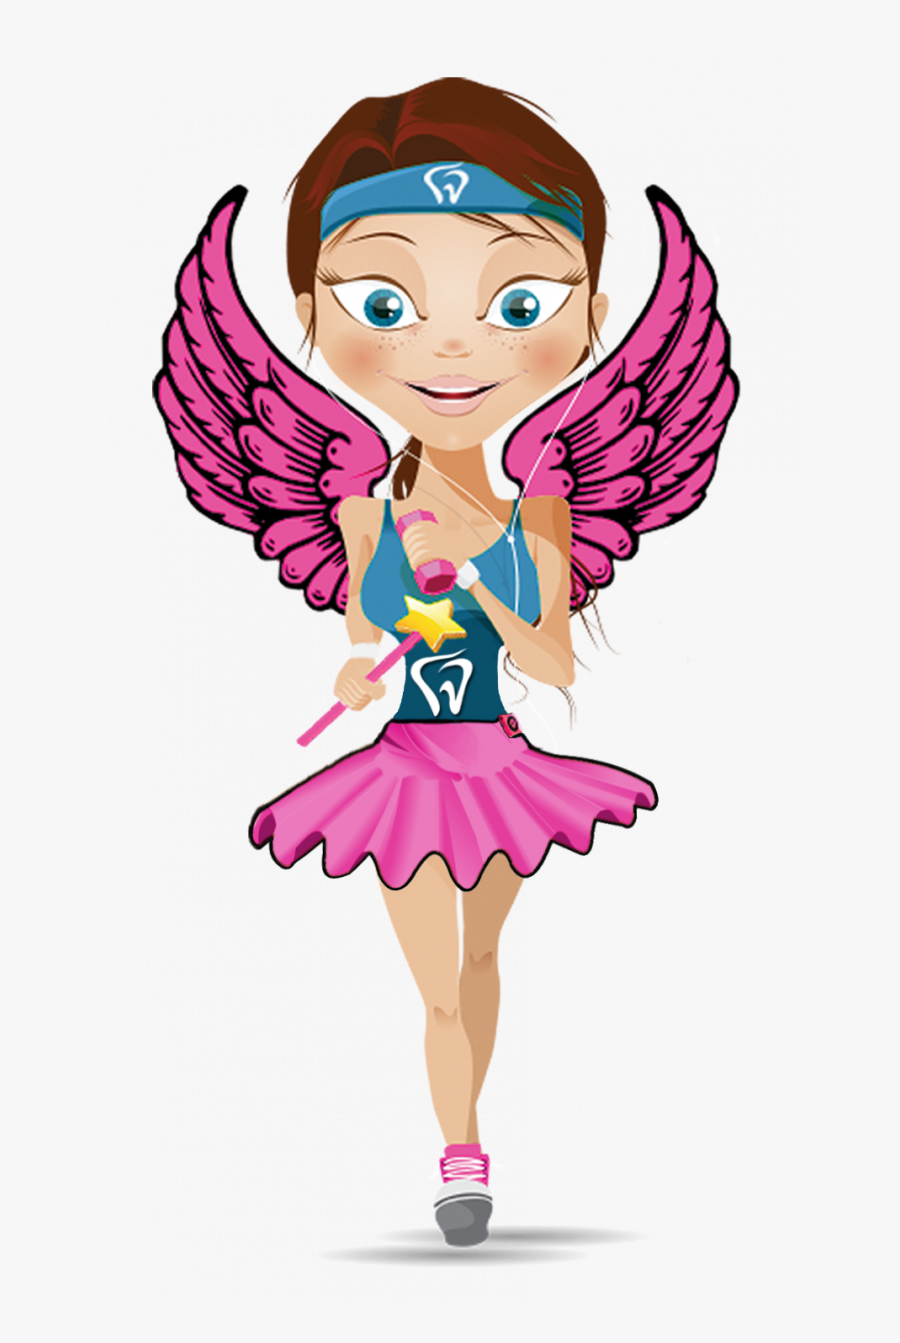 Angel Wings Png Clipart, Transparent Clipart